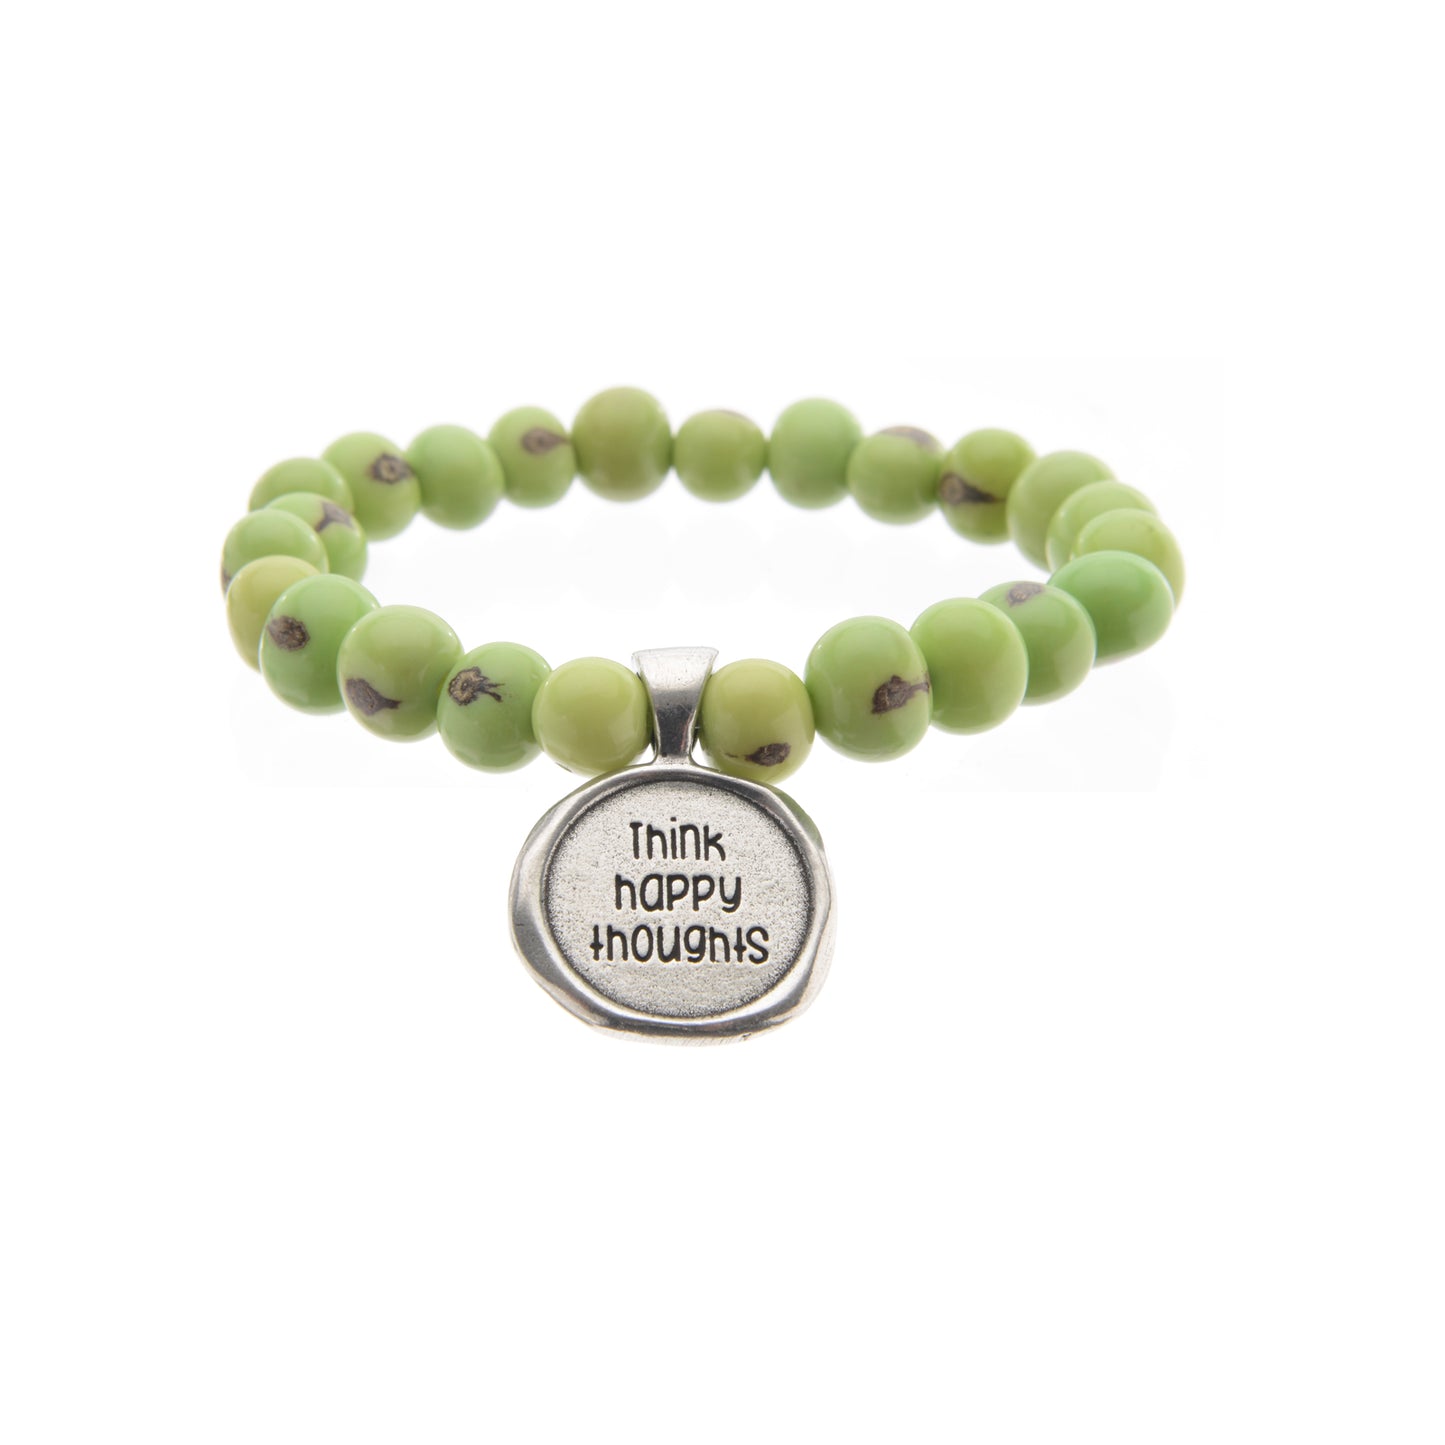 Acai Seeds of Life Bracelet with Wax Seal - Spring Green Beads